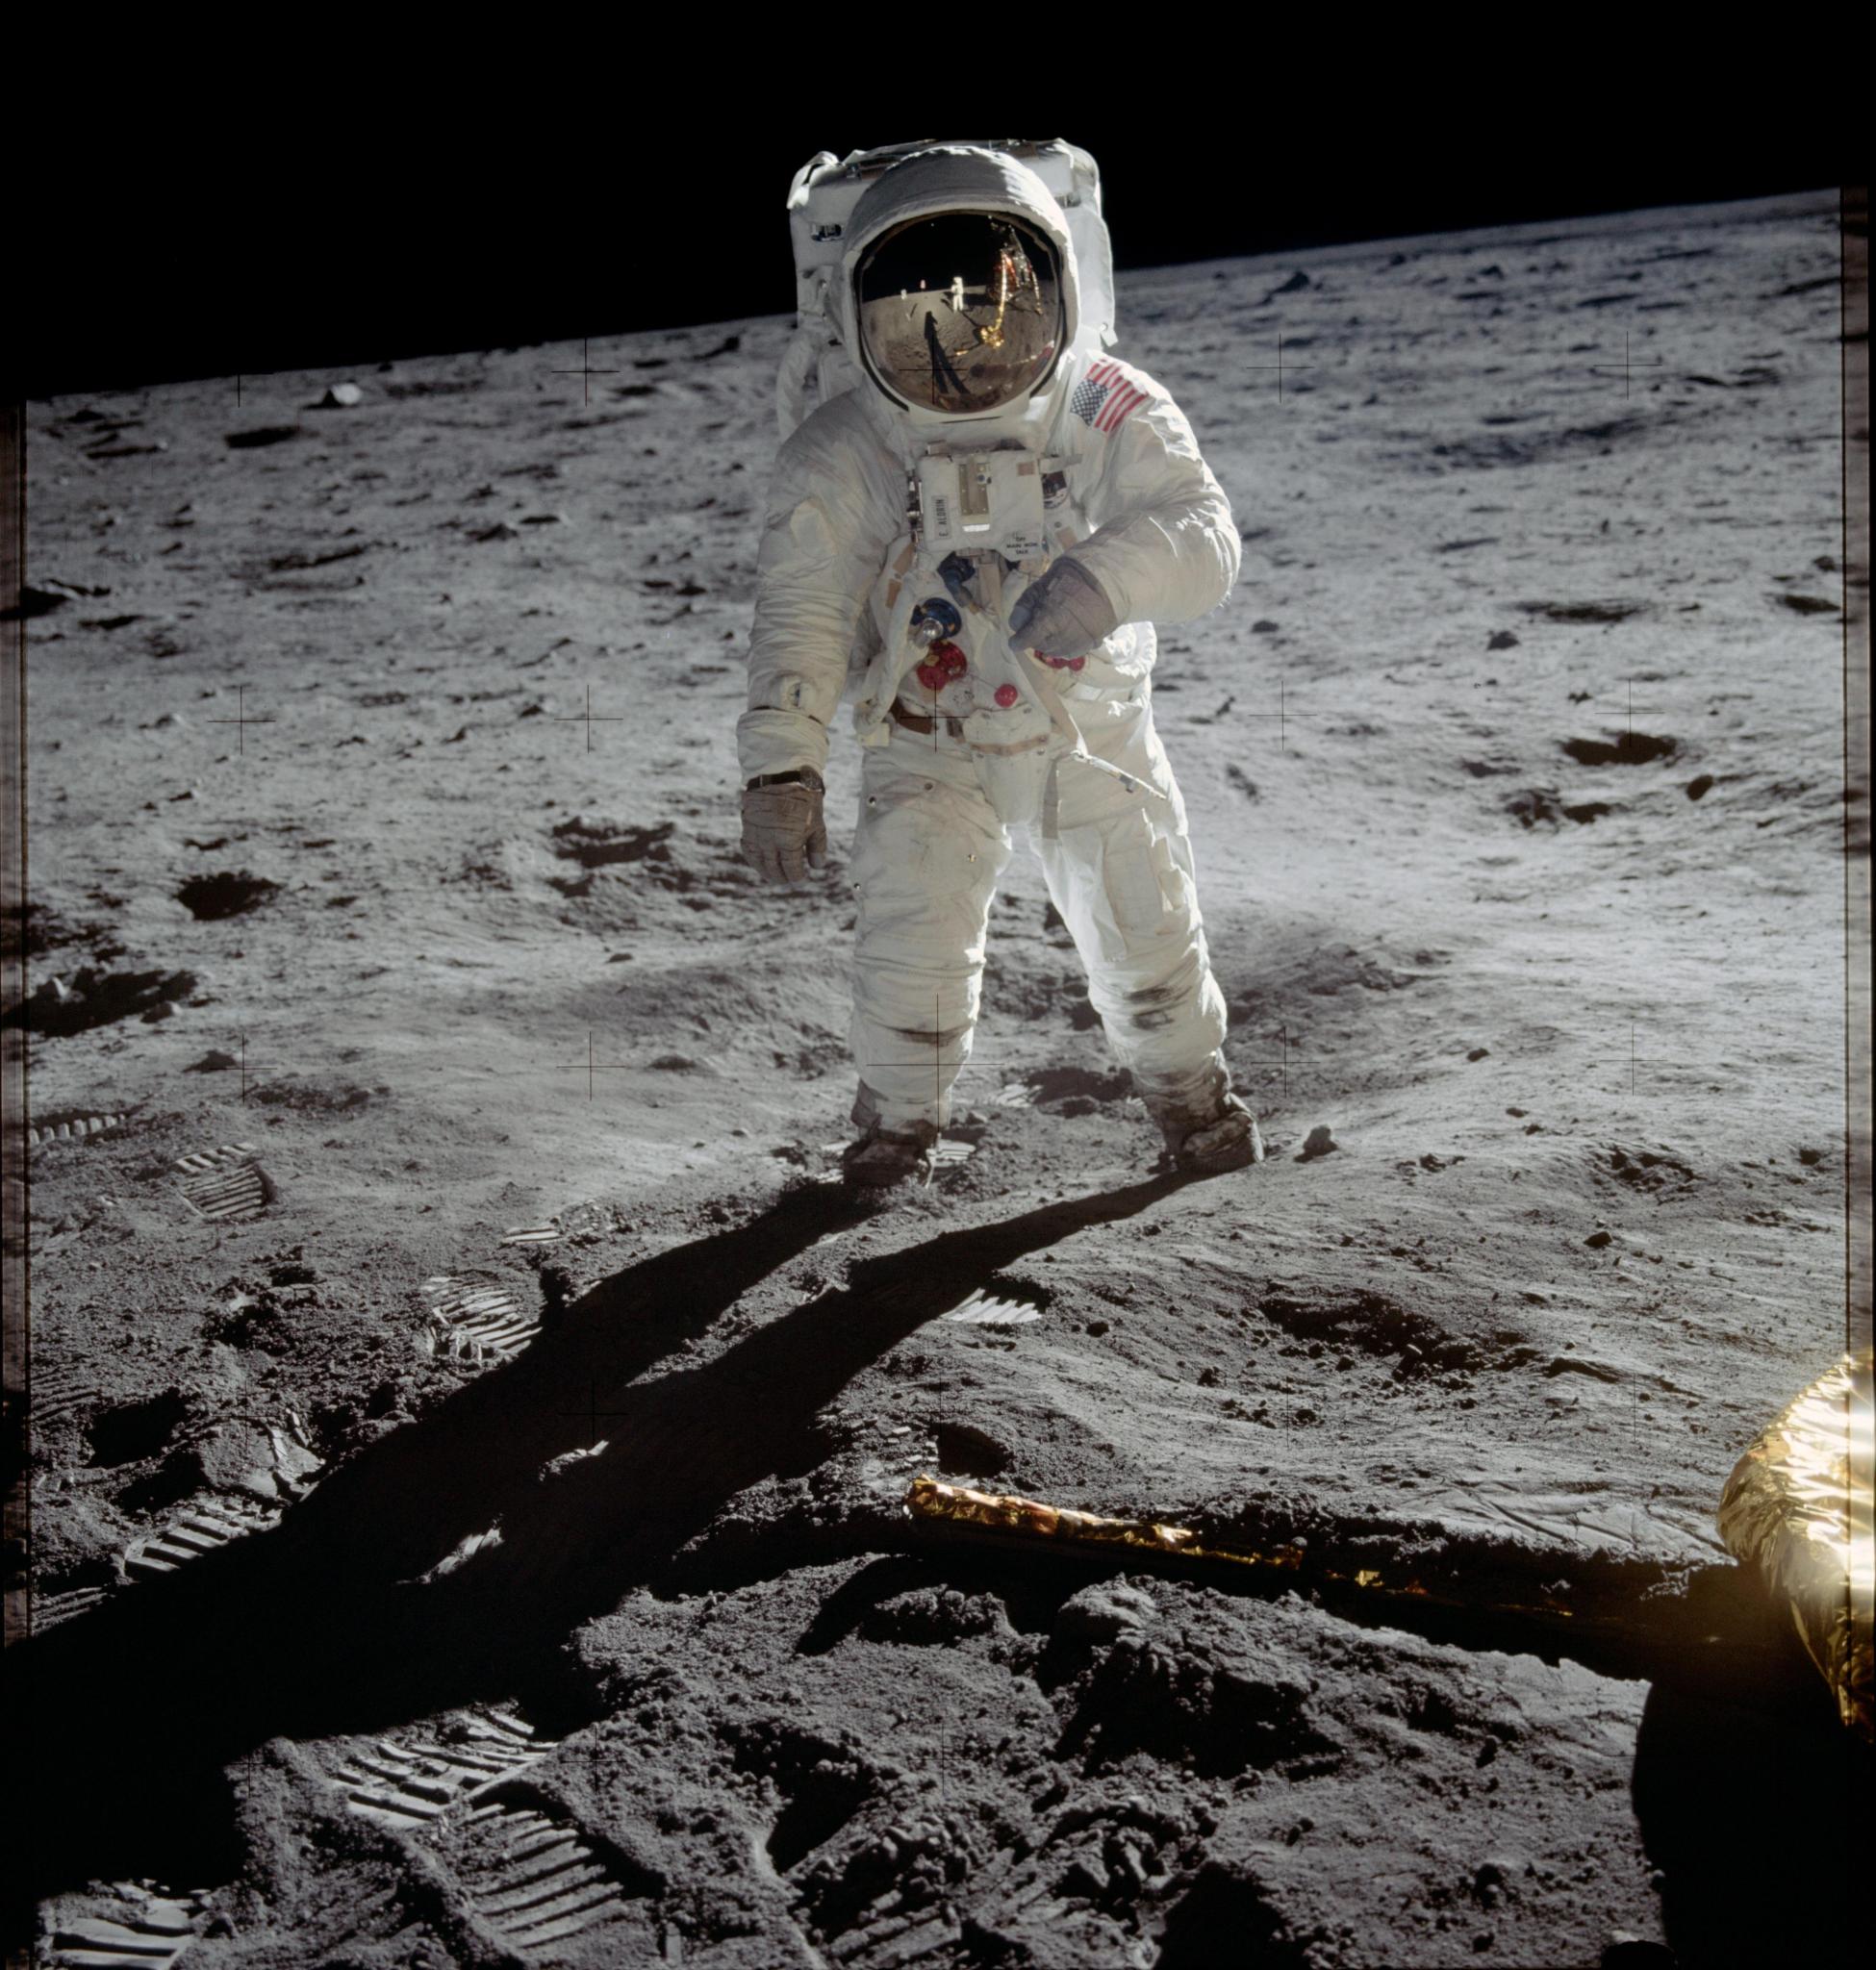 Astronaut Buzz Aldrin walks on the surface of the Moon near the leg of the lunar module Eagle during the Apollo 11 mission.